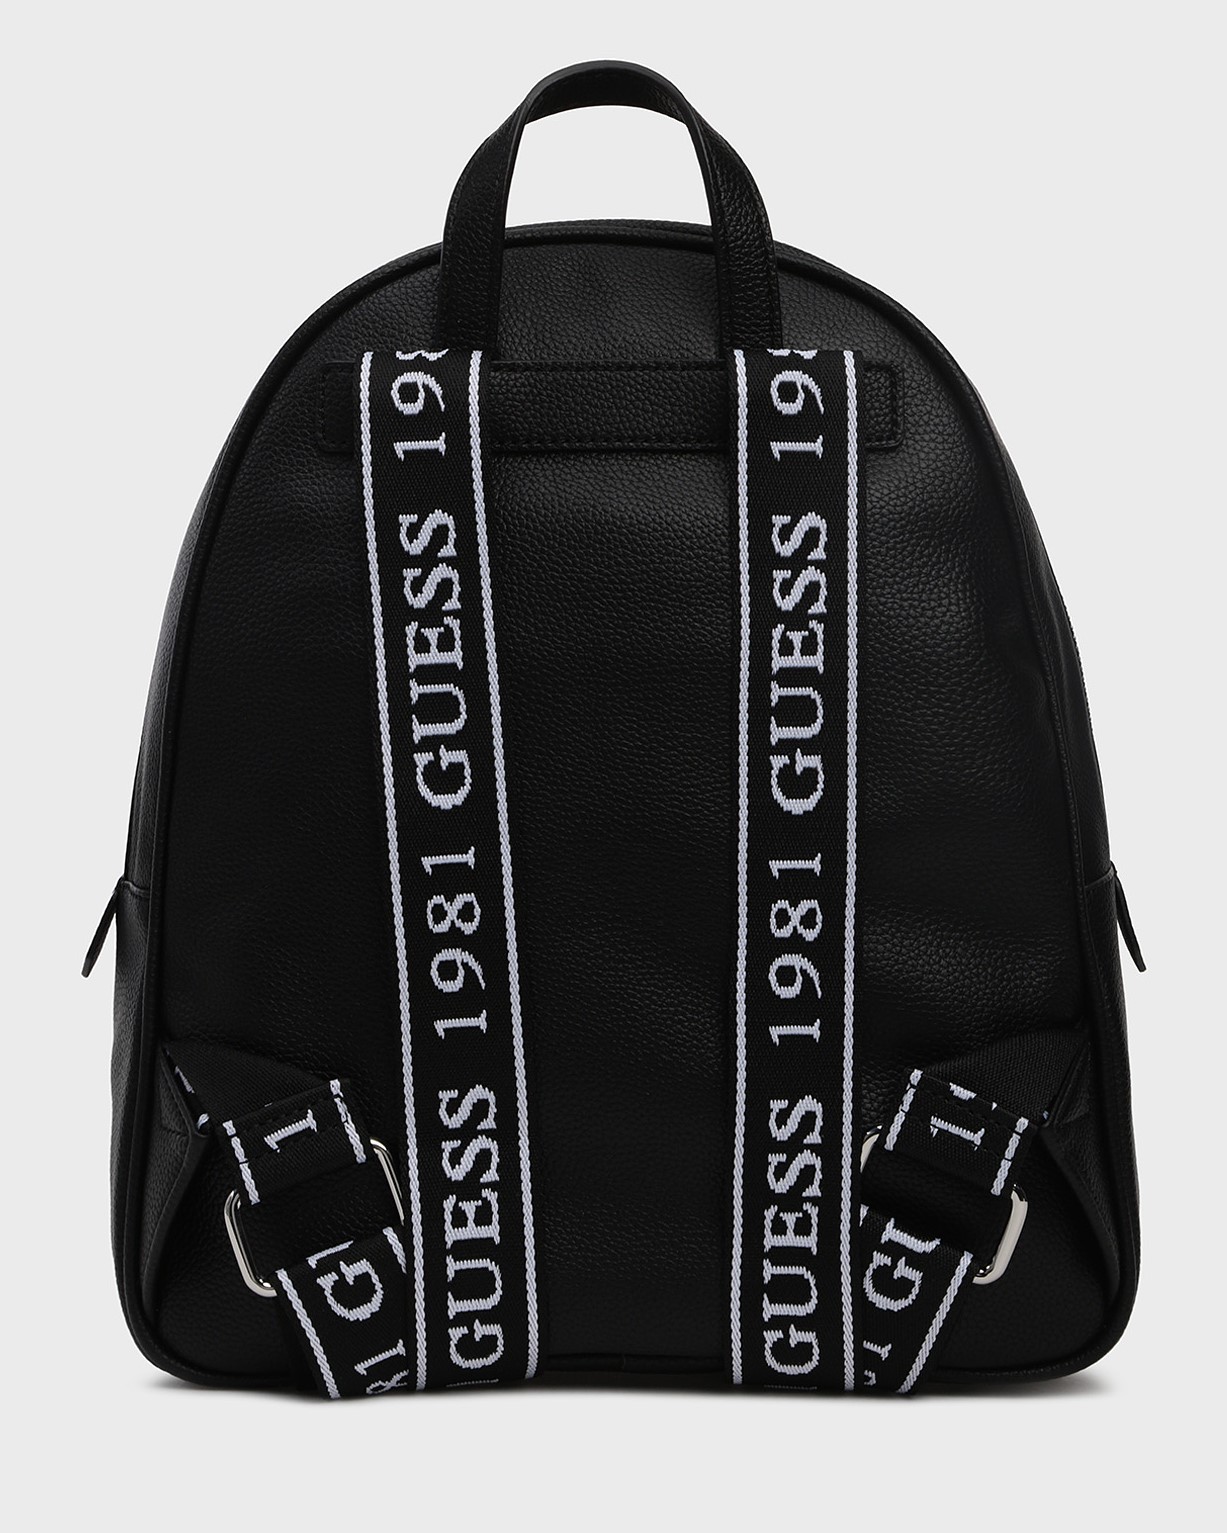 BALO NỮ GUESS BACKPACK 2